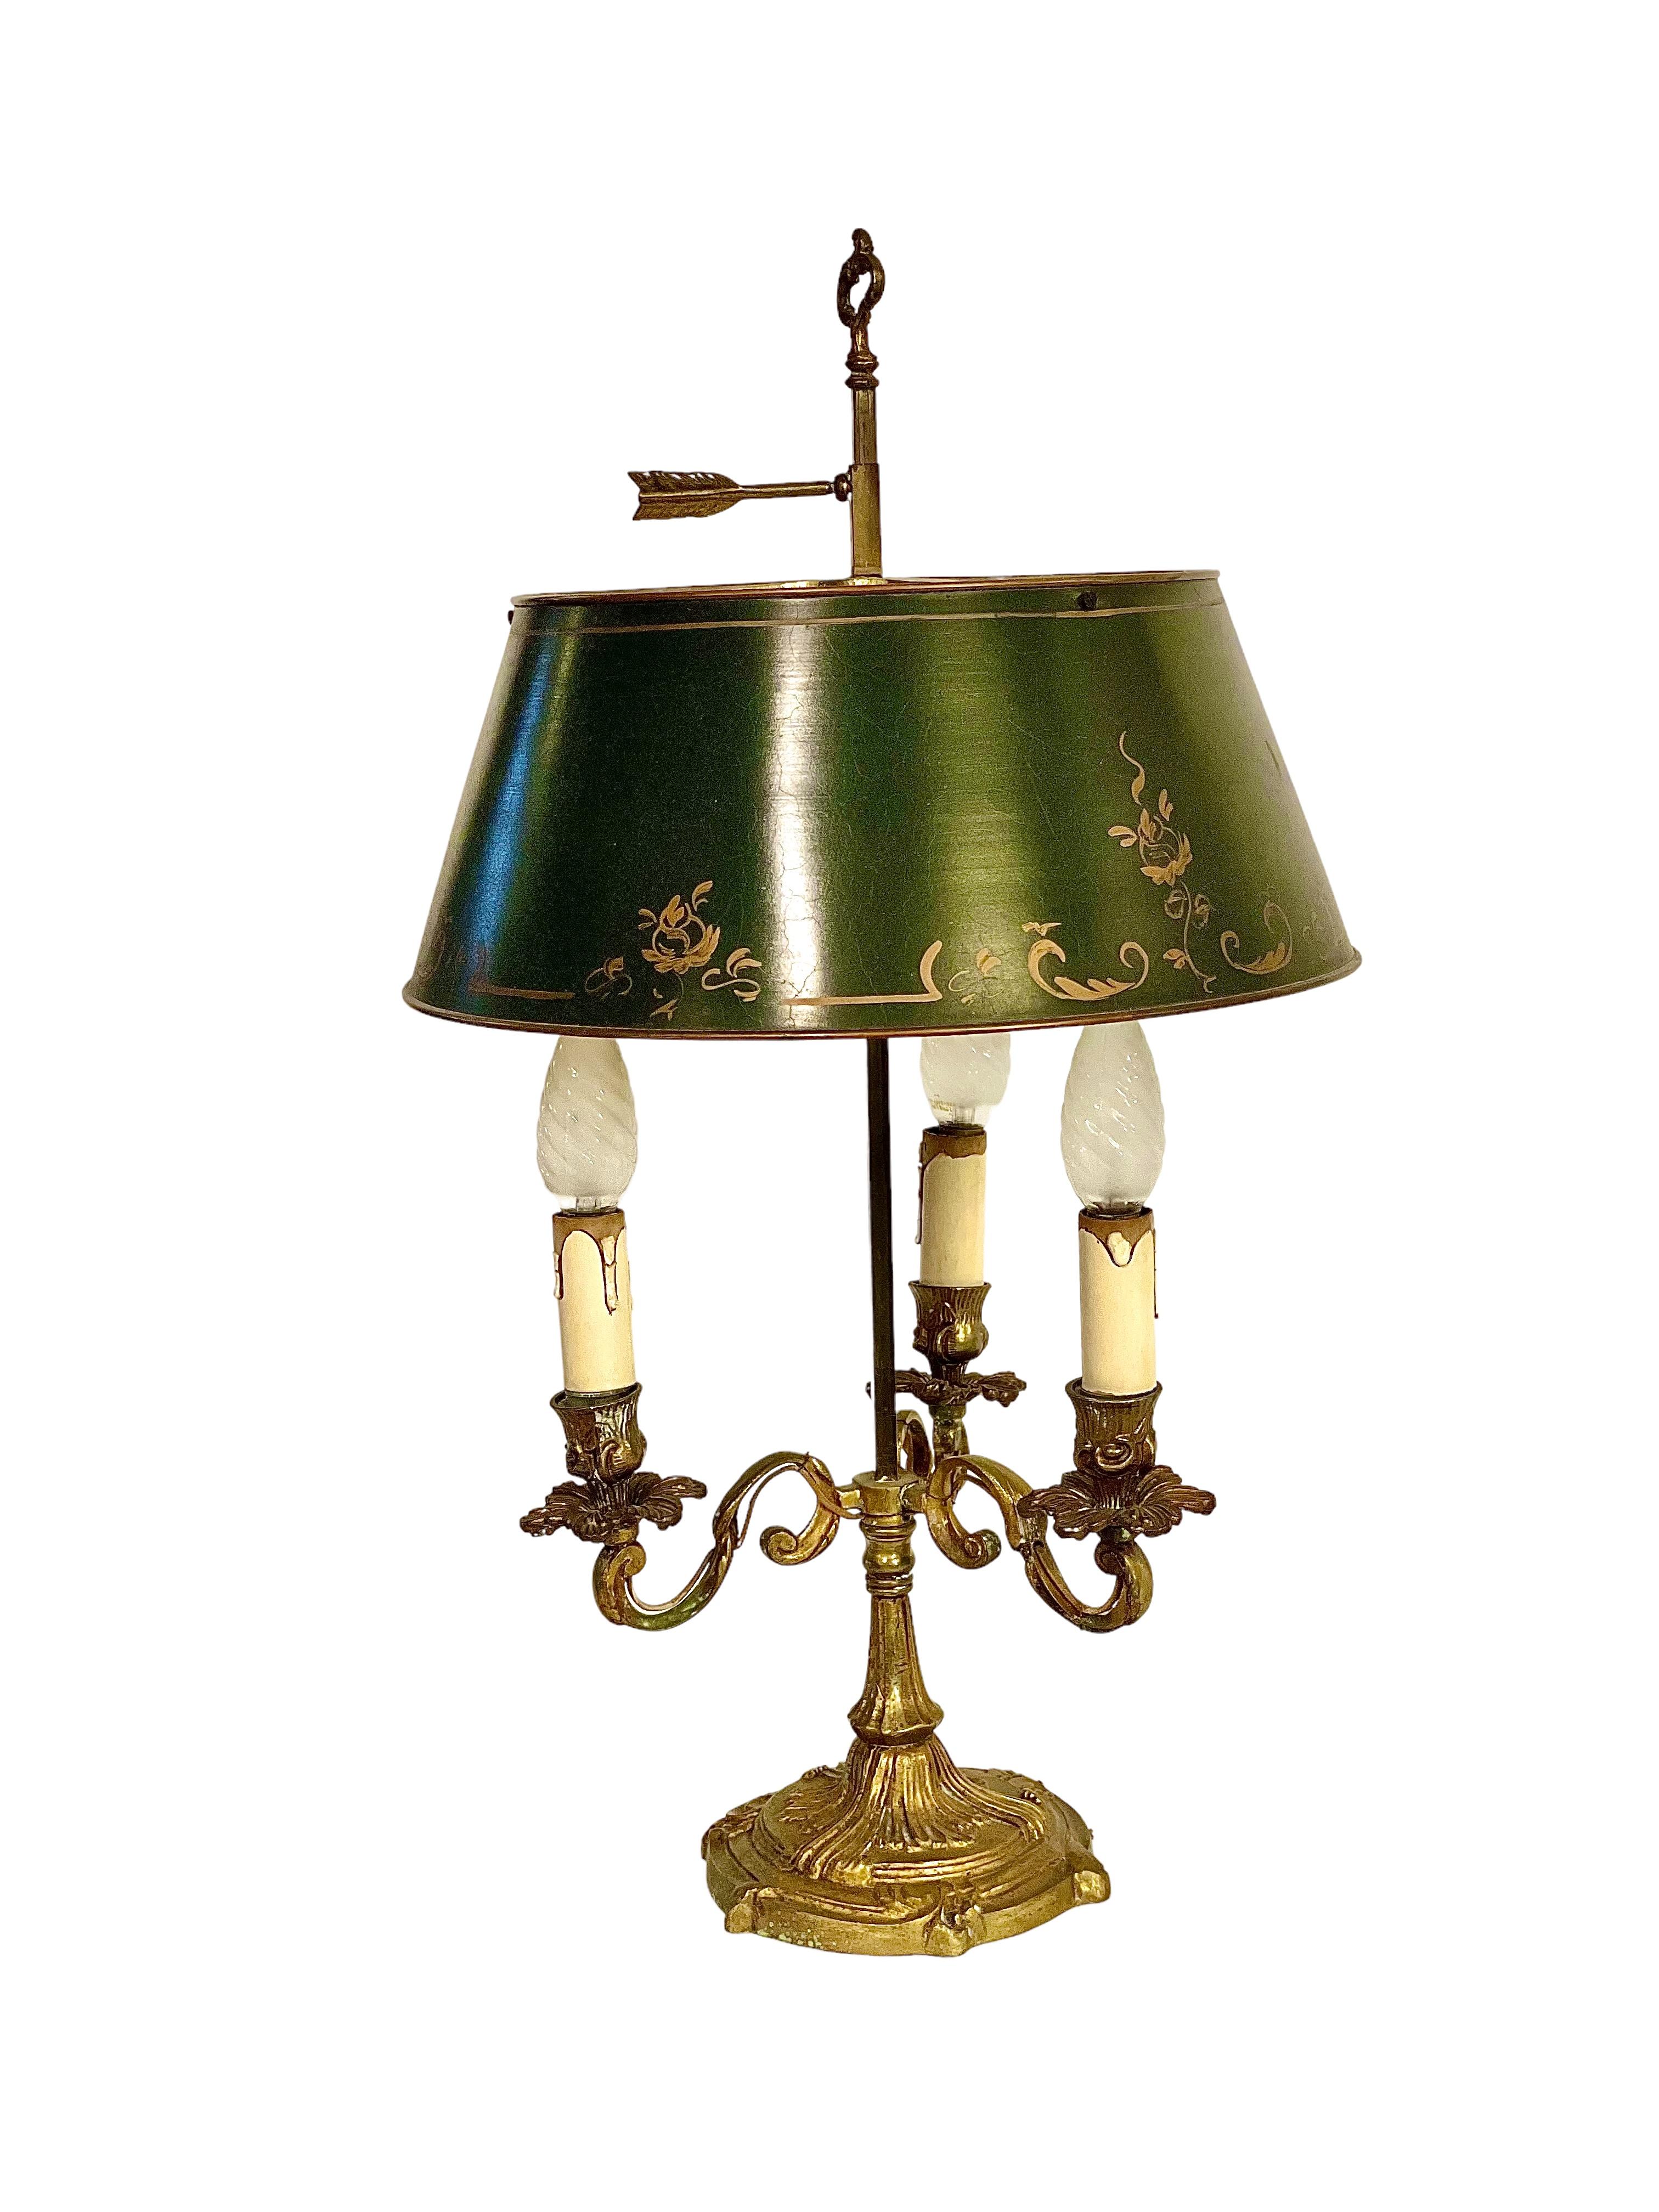 A late 19th century Louis XV-style Bouillotte table lamp, with original, green, gilt- decorated tole lampshade, above a base of three upturned decorative brass candle arms supported above a heavy base. Featuring a tall carrying handle with a festoon